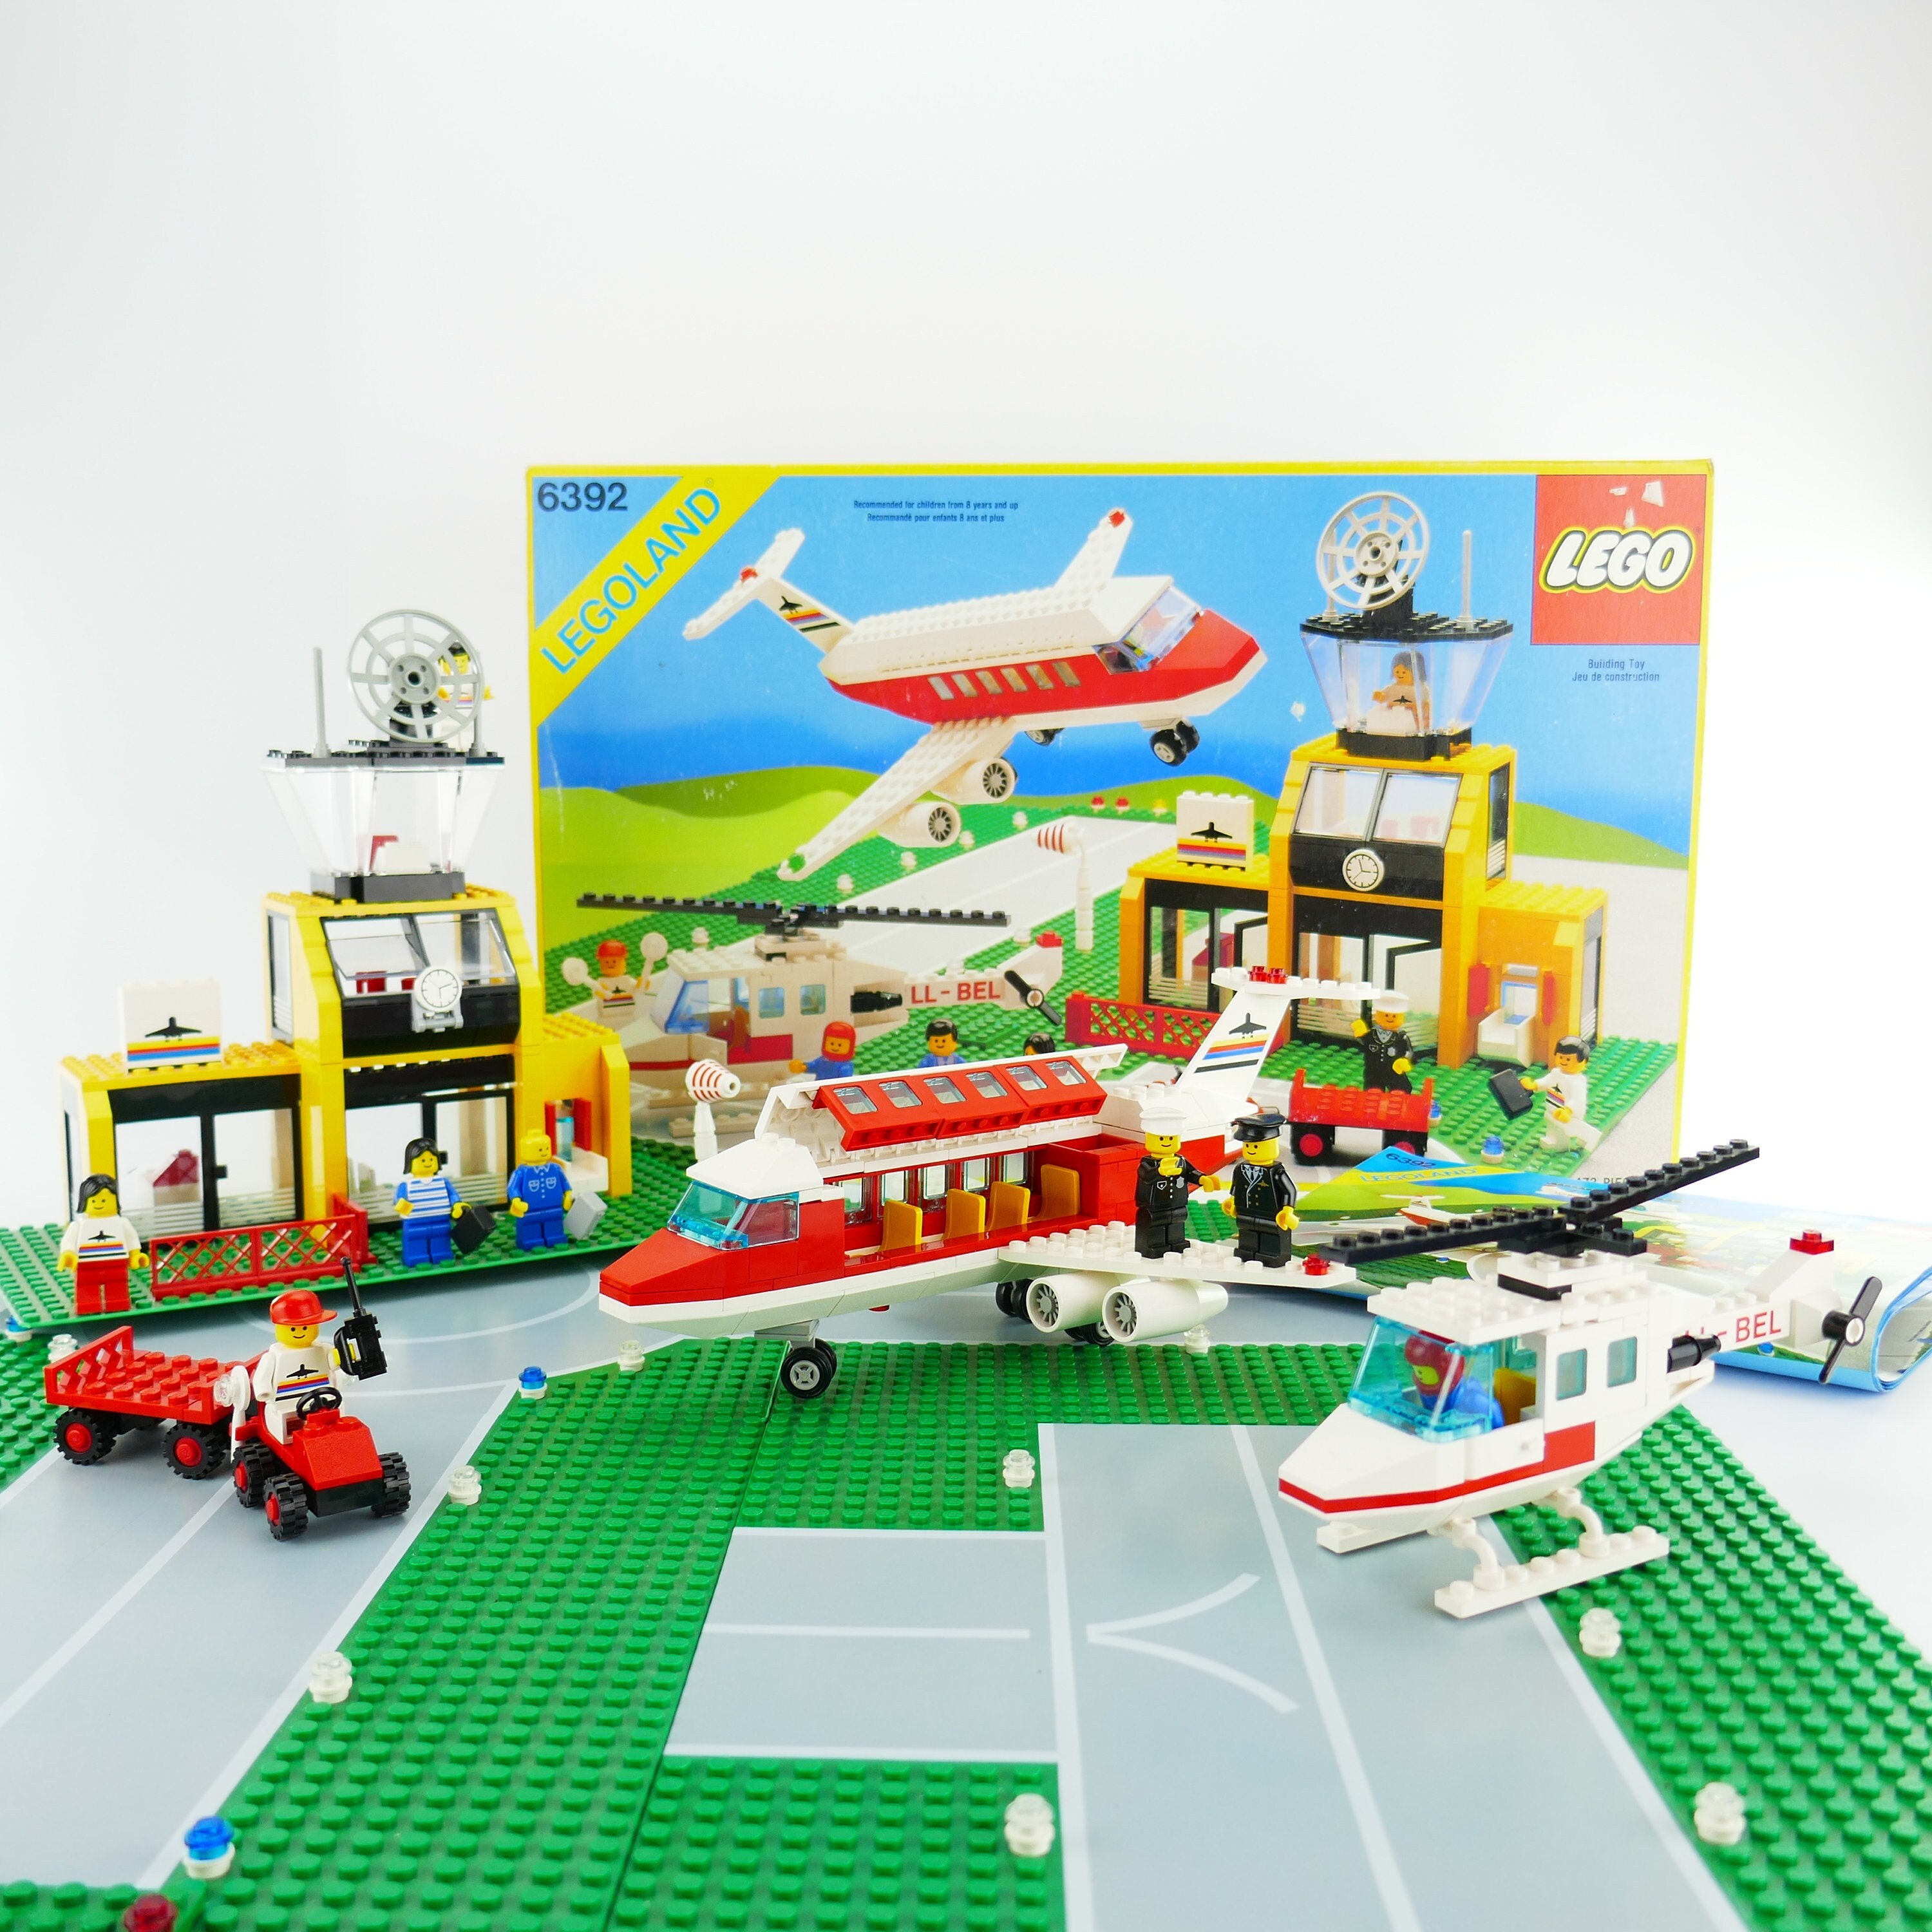 LEGO 6392 Airport in Box 99% Complete With Box & -